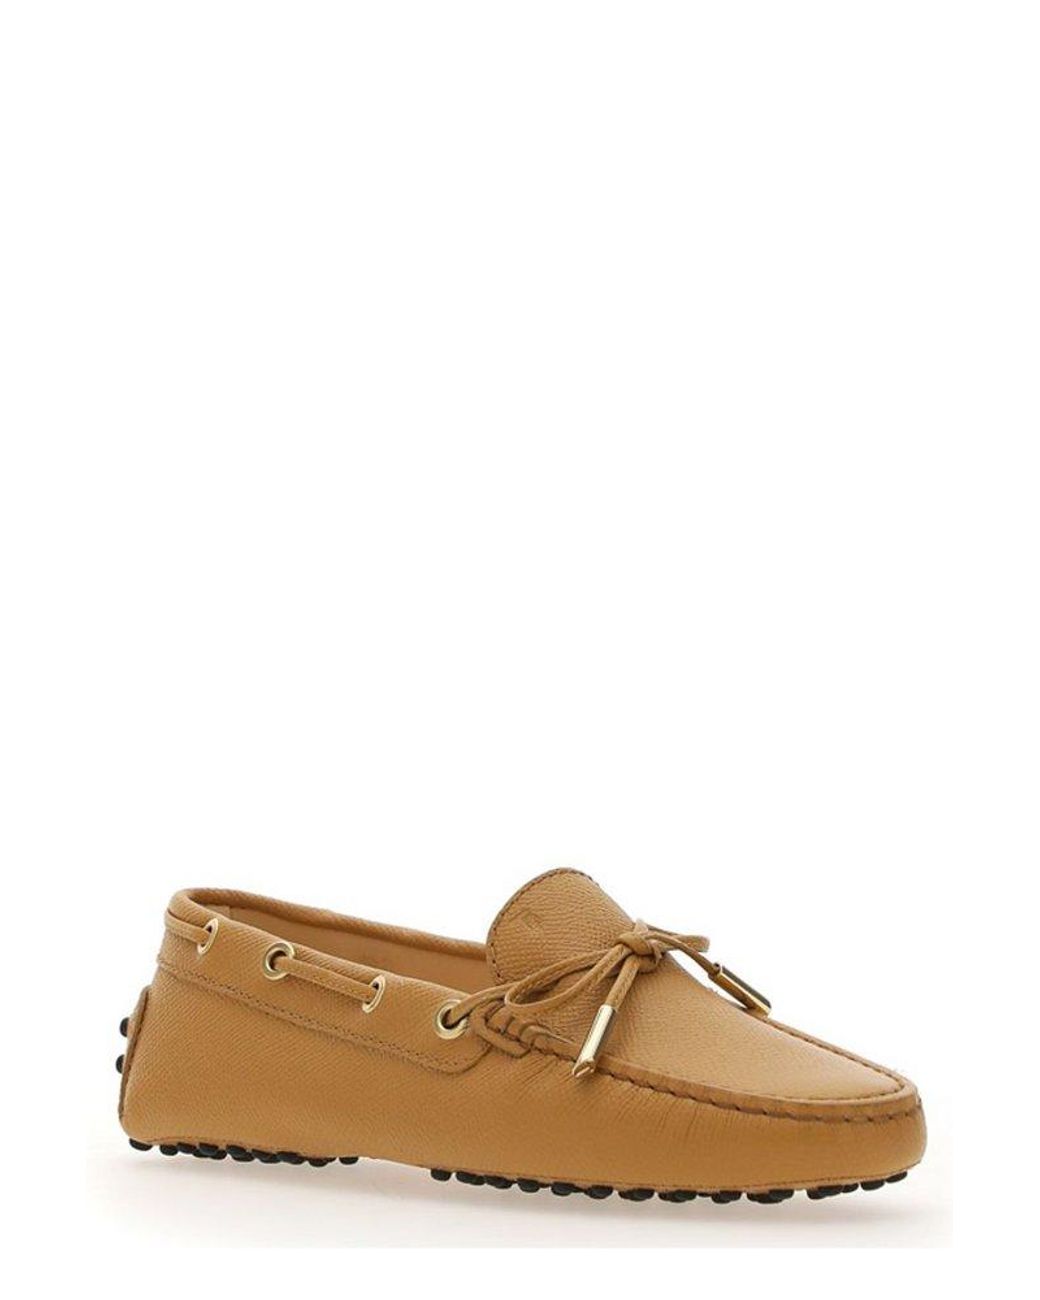 Tods Gommino Suede Loafers in Brown Womens Shoes Flats and flat shoes Loafers and moccasins 